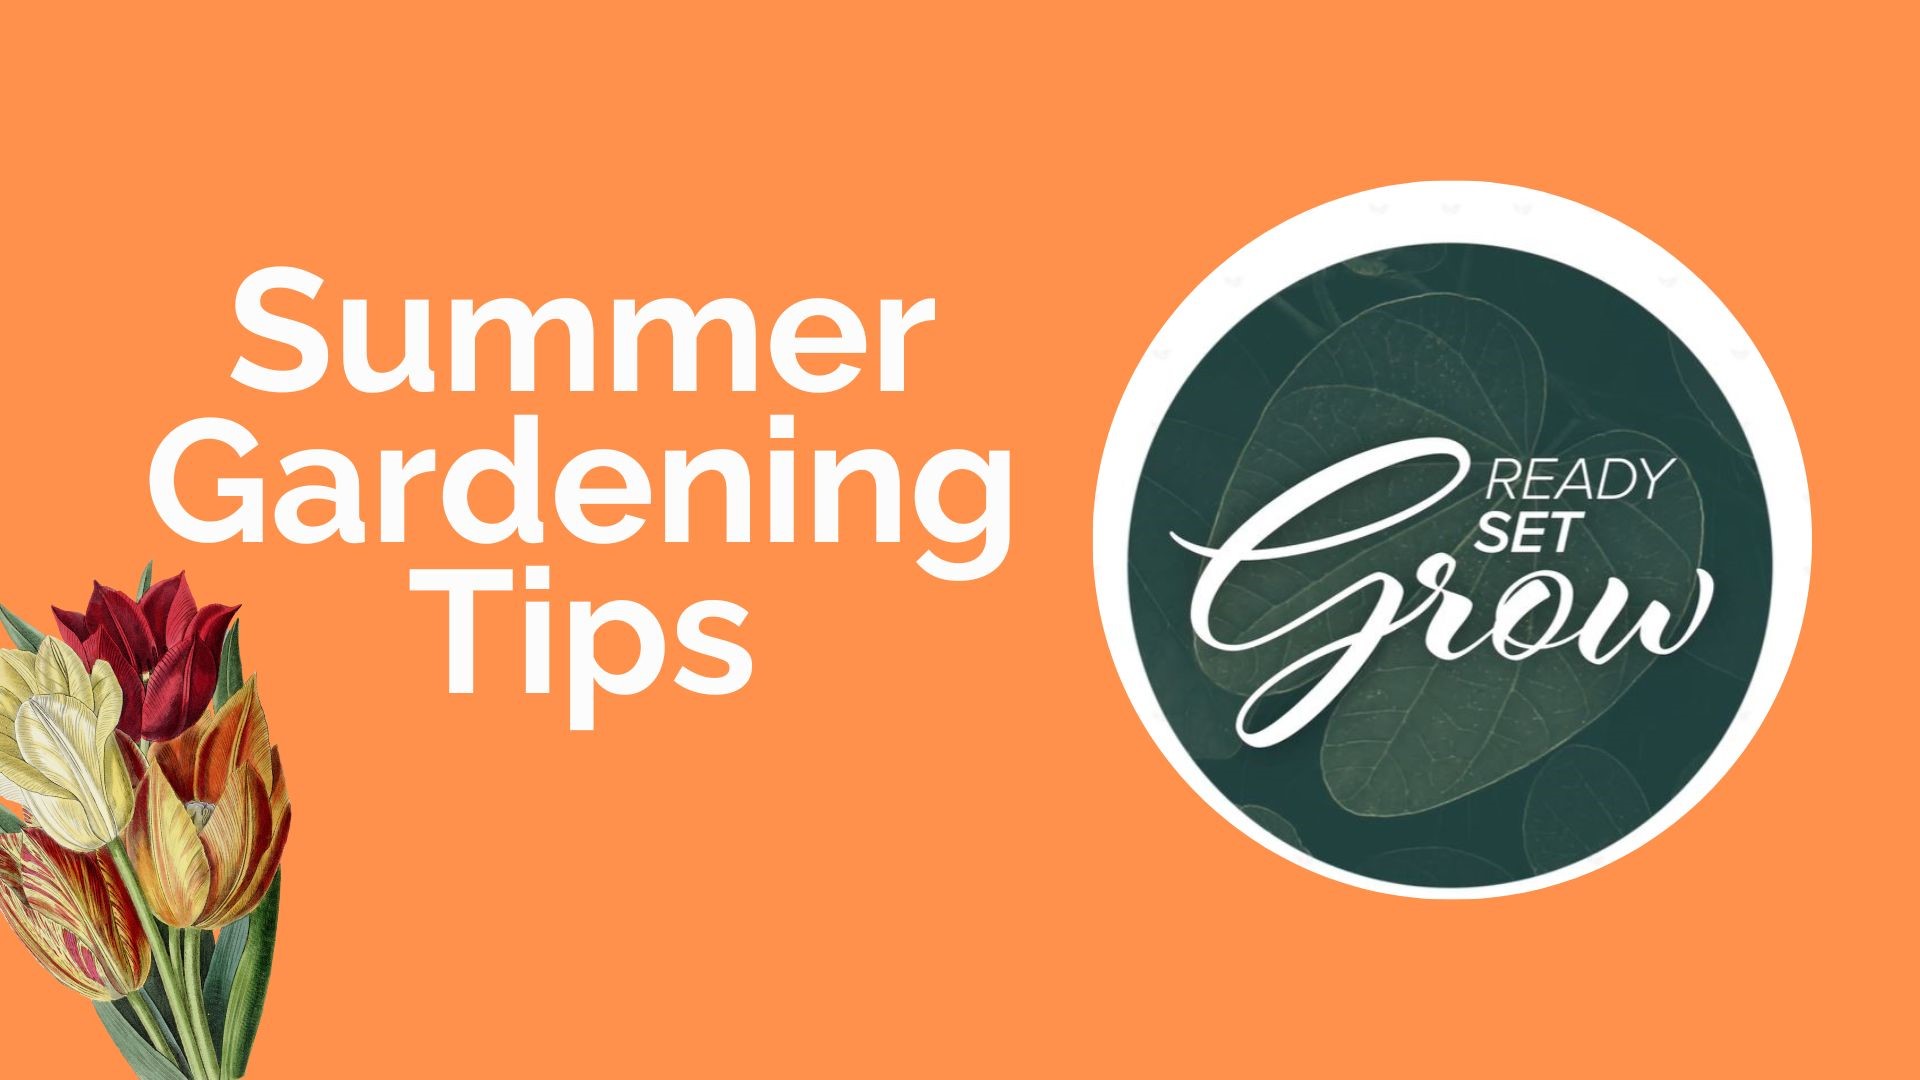 Tips to keep your lawn and garden safe in the heat, as well as keep your yard free of mosquitoes. Plus how you can grow your own herbs, onions and leeks.